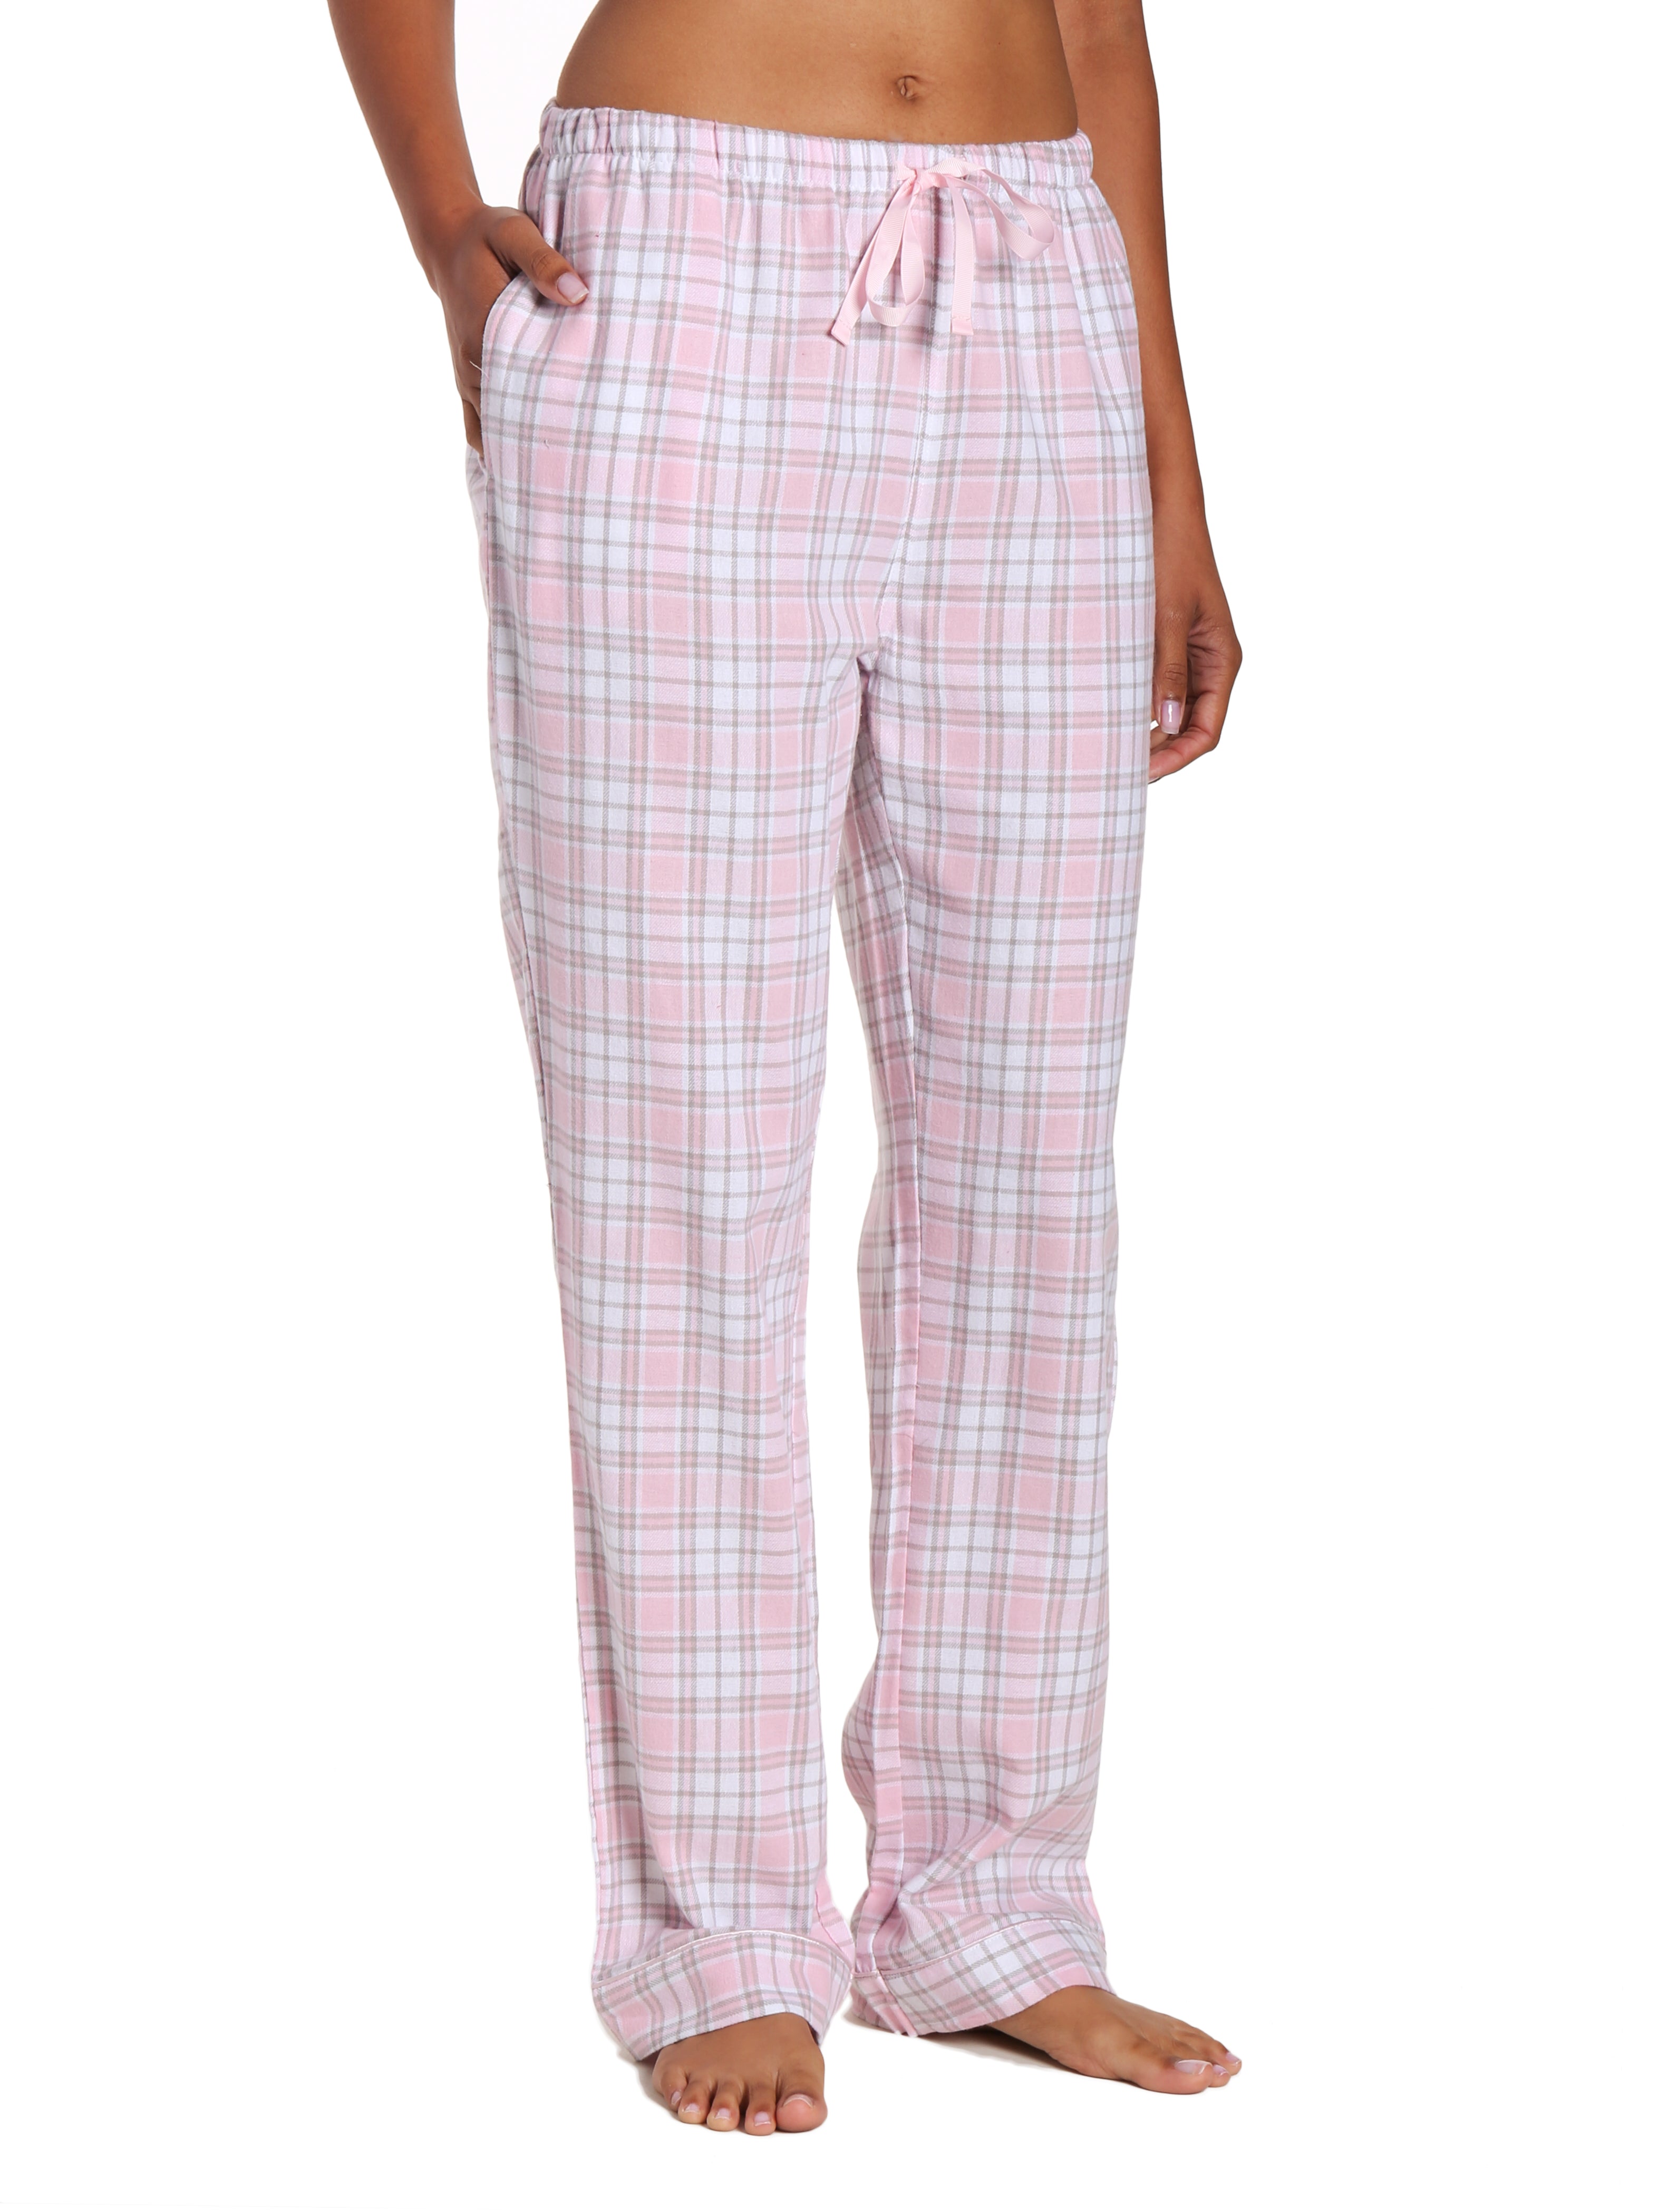 Womens 100% Cotton Lightweight Flannel Lounge Pants - Plaid White-Pink ...